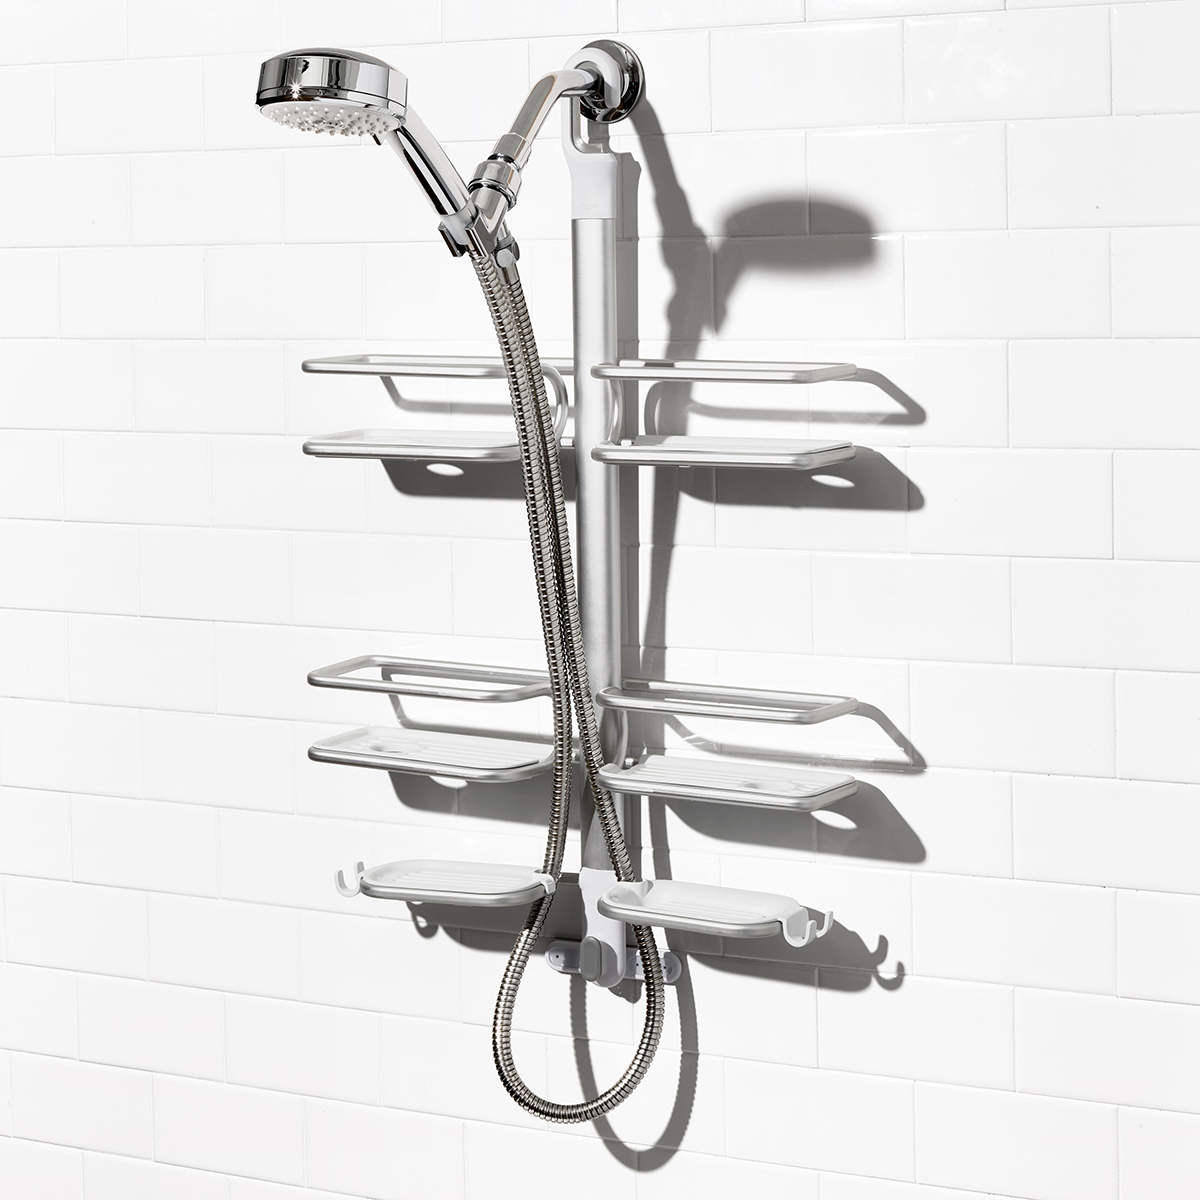 OXO Good Grips Hose Keeper Shower Caddy | The Container Store